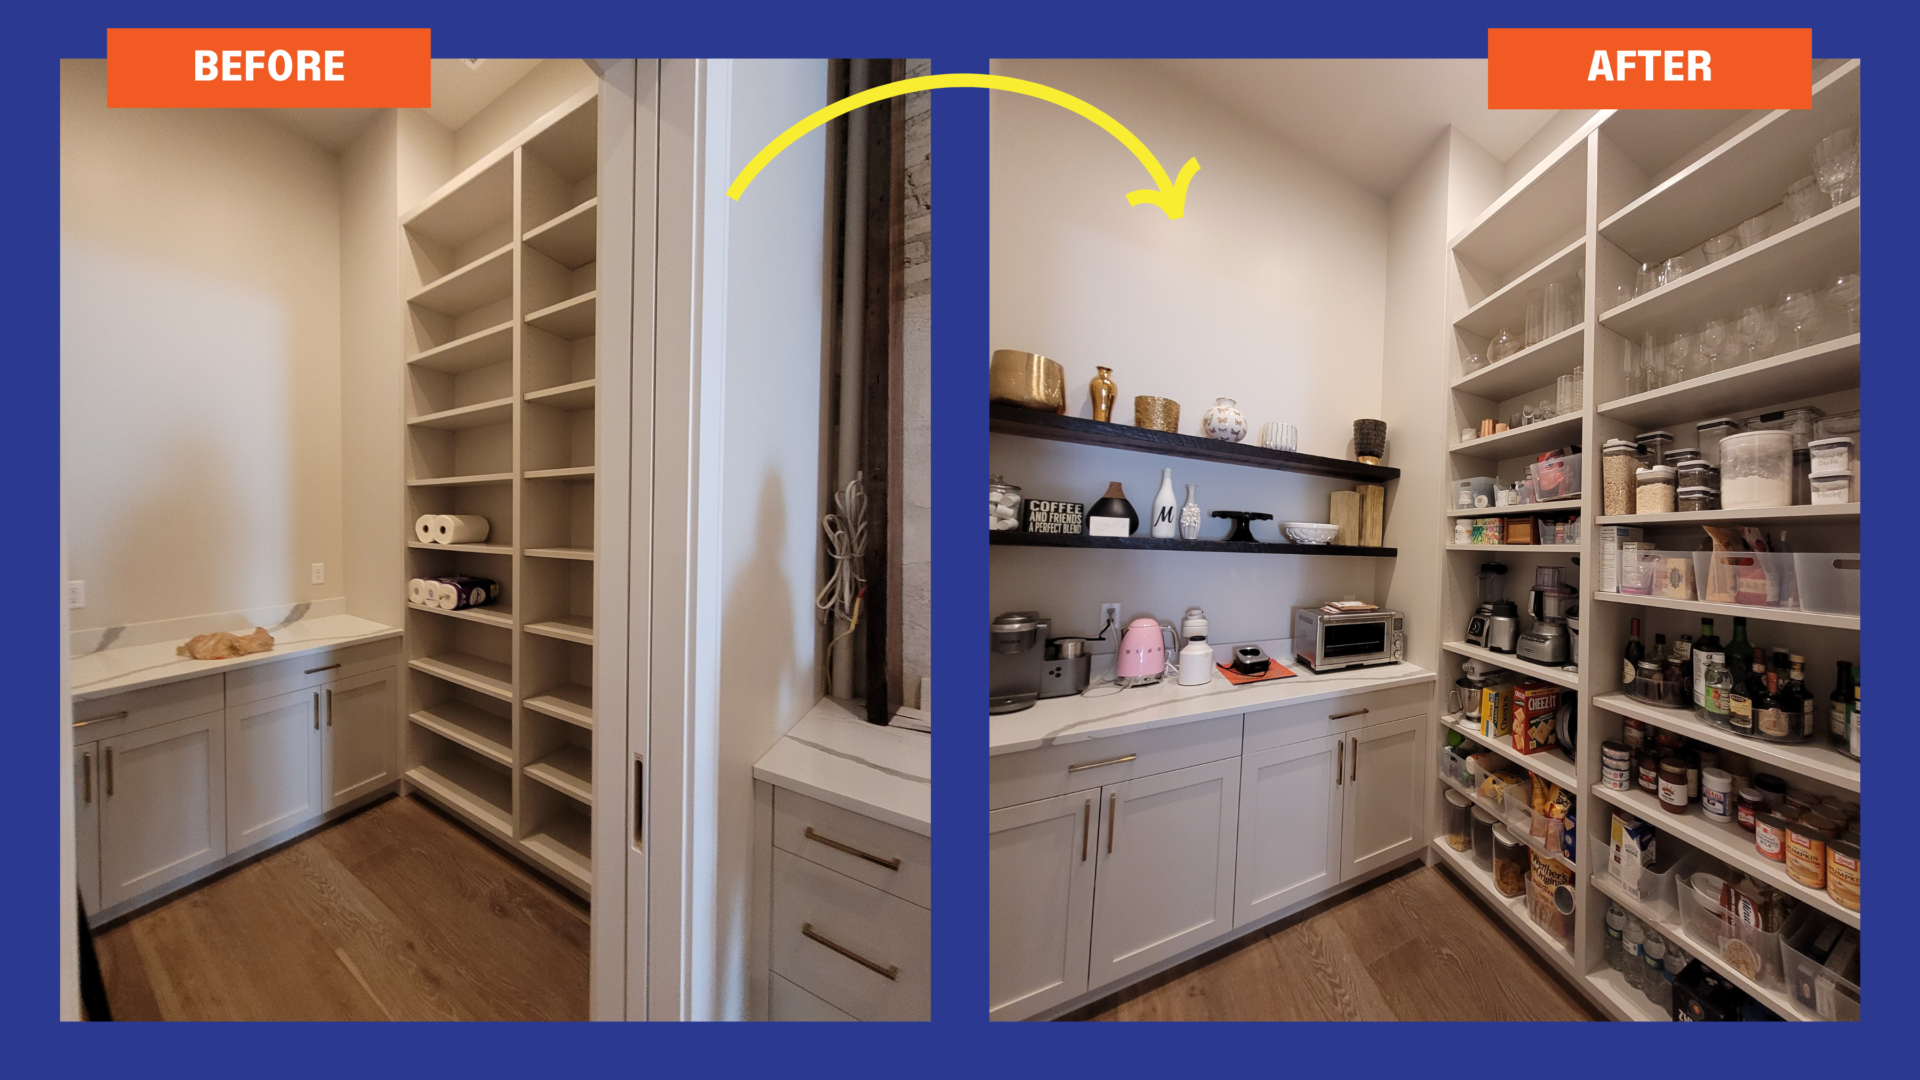 Before and after of pantry room after a move. Left is empty. The right is full of glasses, pantry items, and other cookware.